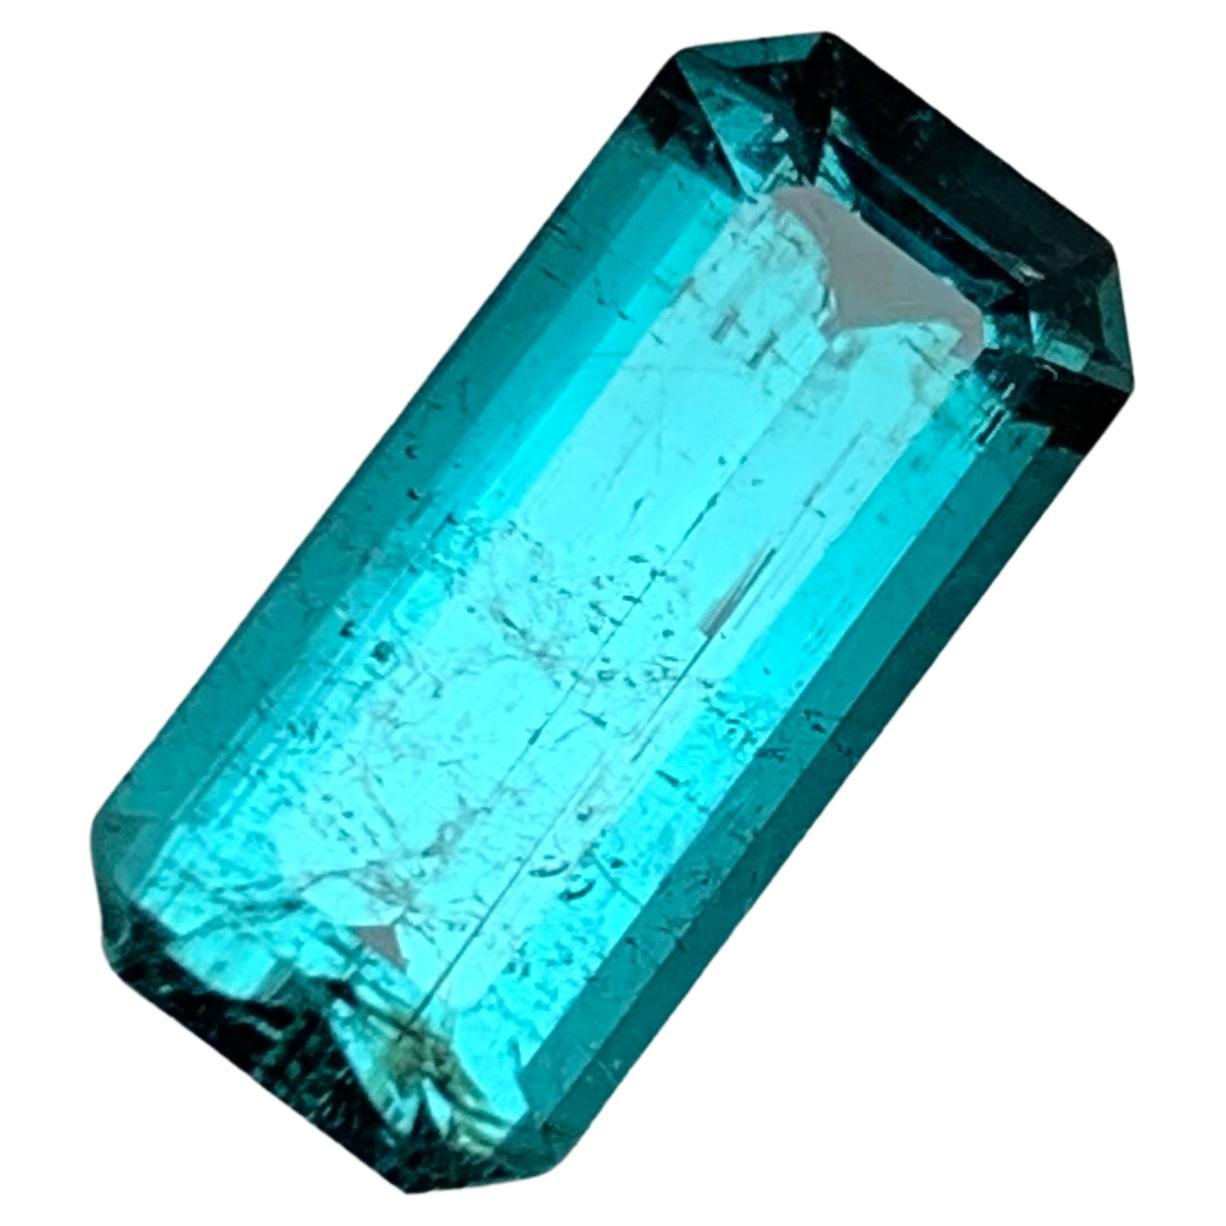 Rare Neon Blue Natural Tourmaline Gemstone, 4 Ct Emerald Cut for Ring/Jewelry AF For Sale